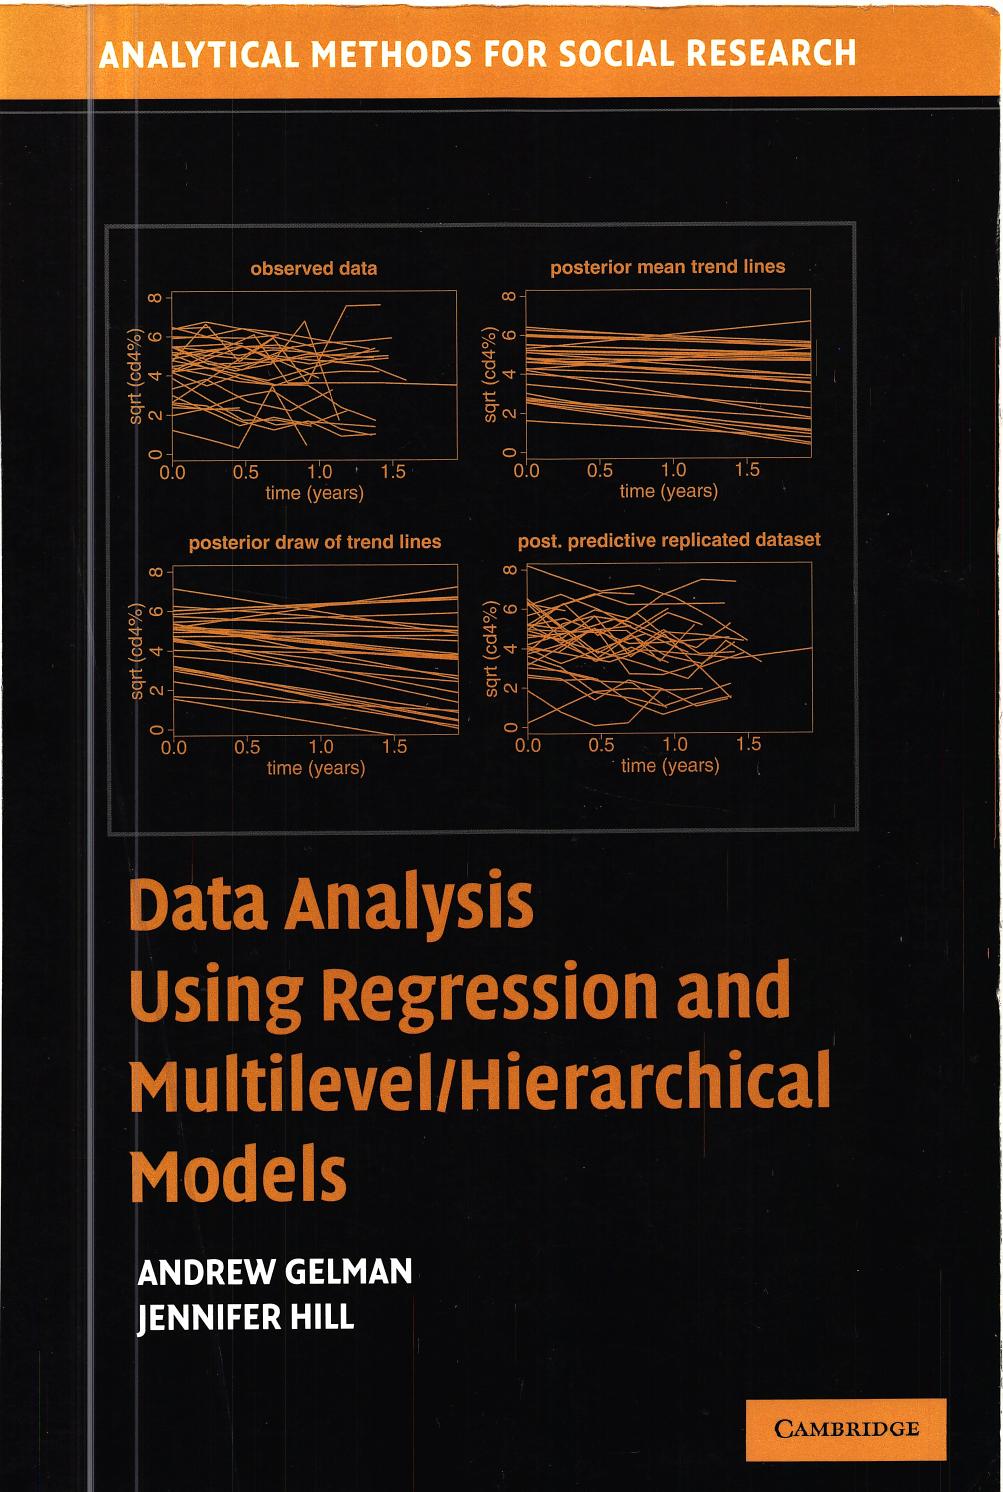 Data Analysis using Regression and Multilevel/Hierarchical Models